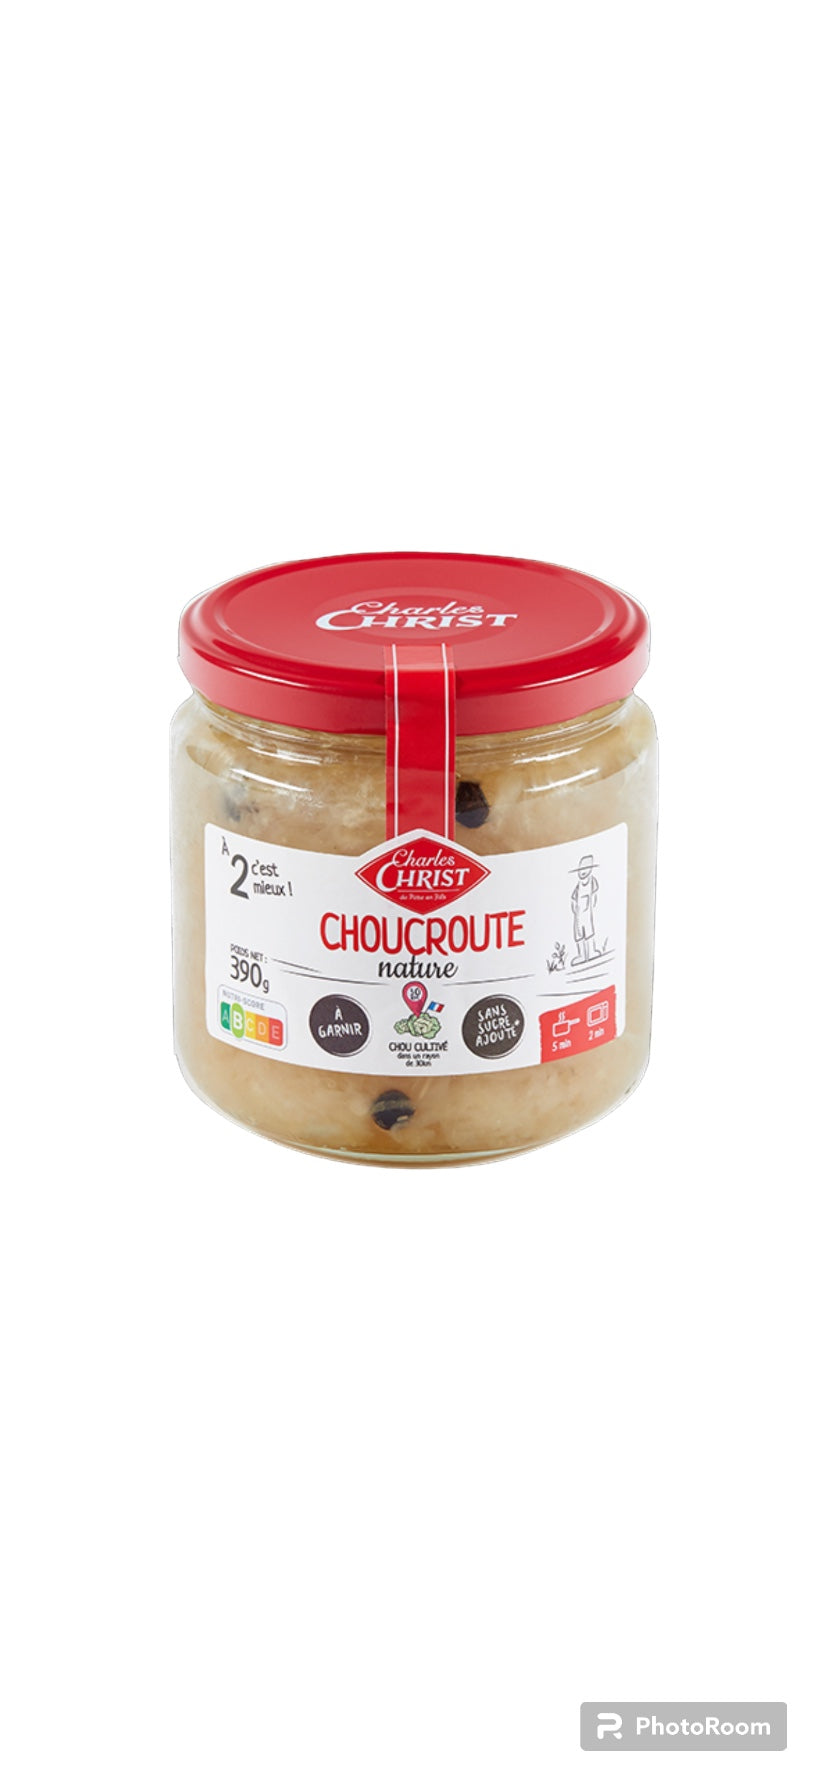 CHARLES CHRIST Choucroute nature 390g D101